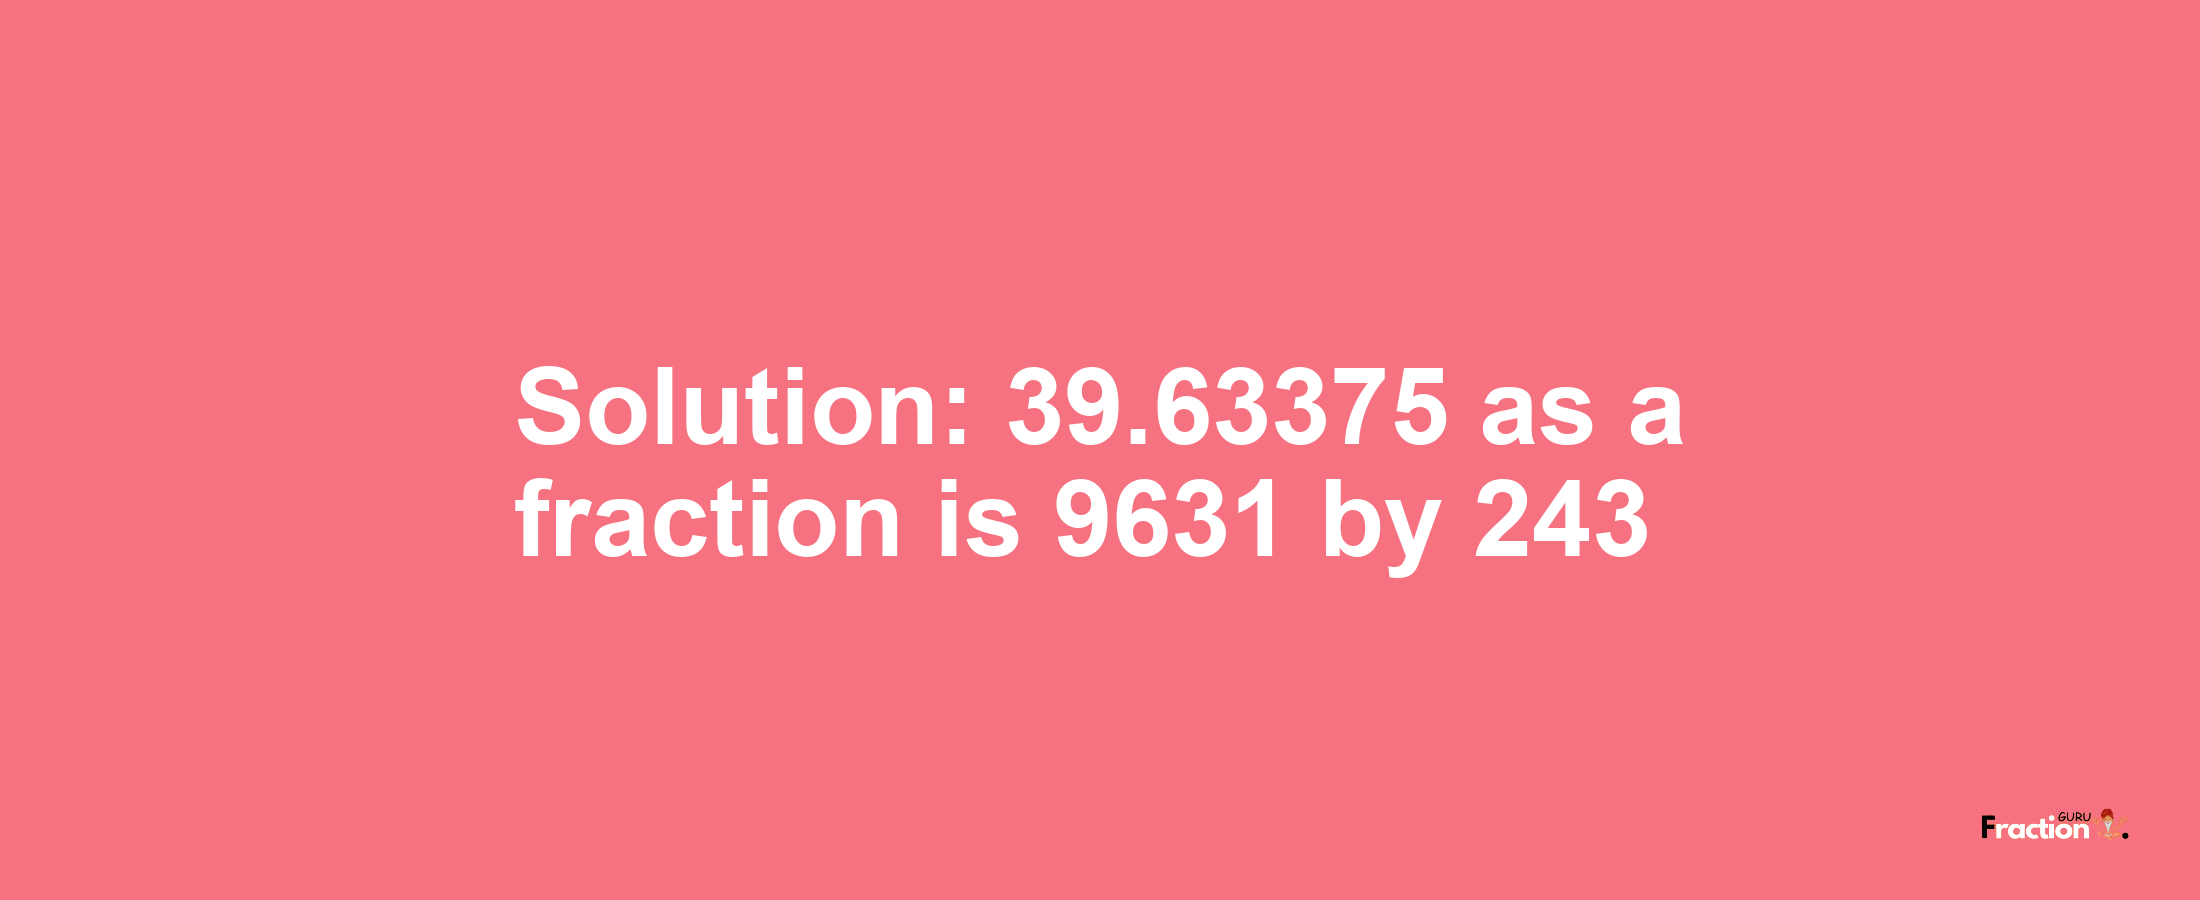 Solution:39.63375 as a fraction is 9631/243